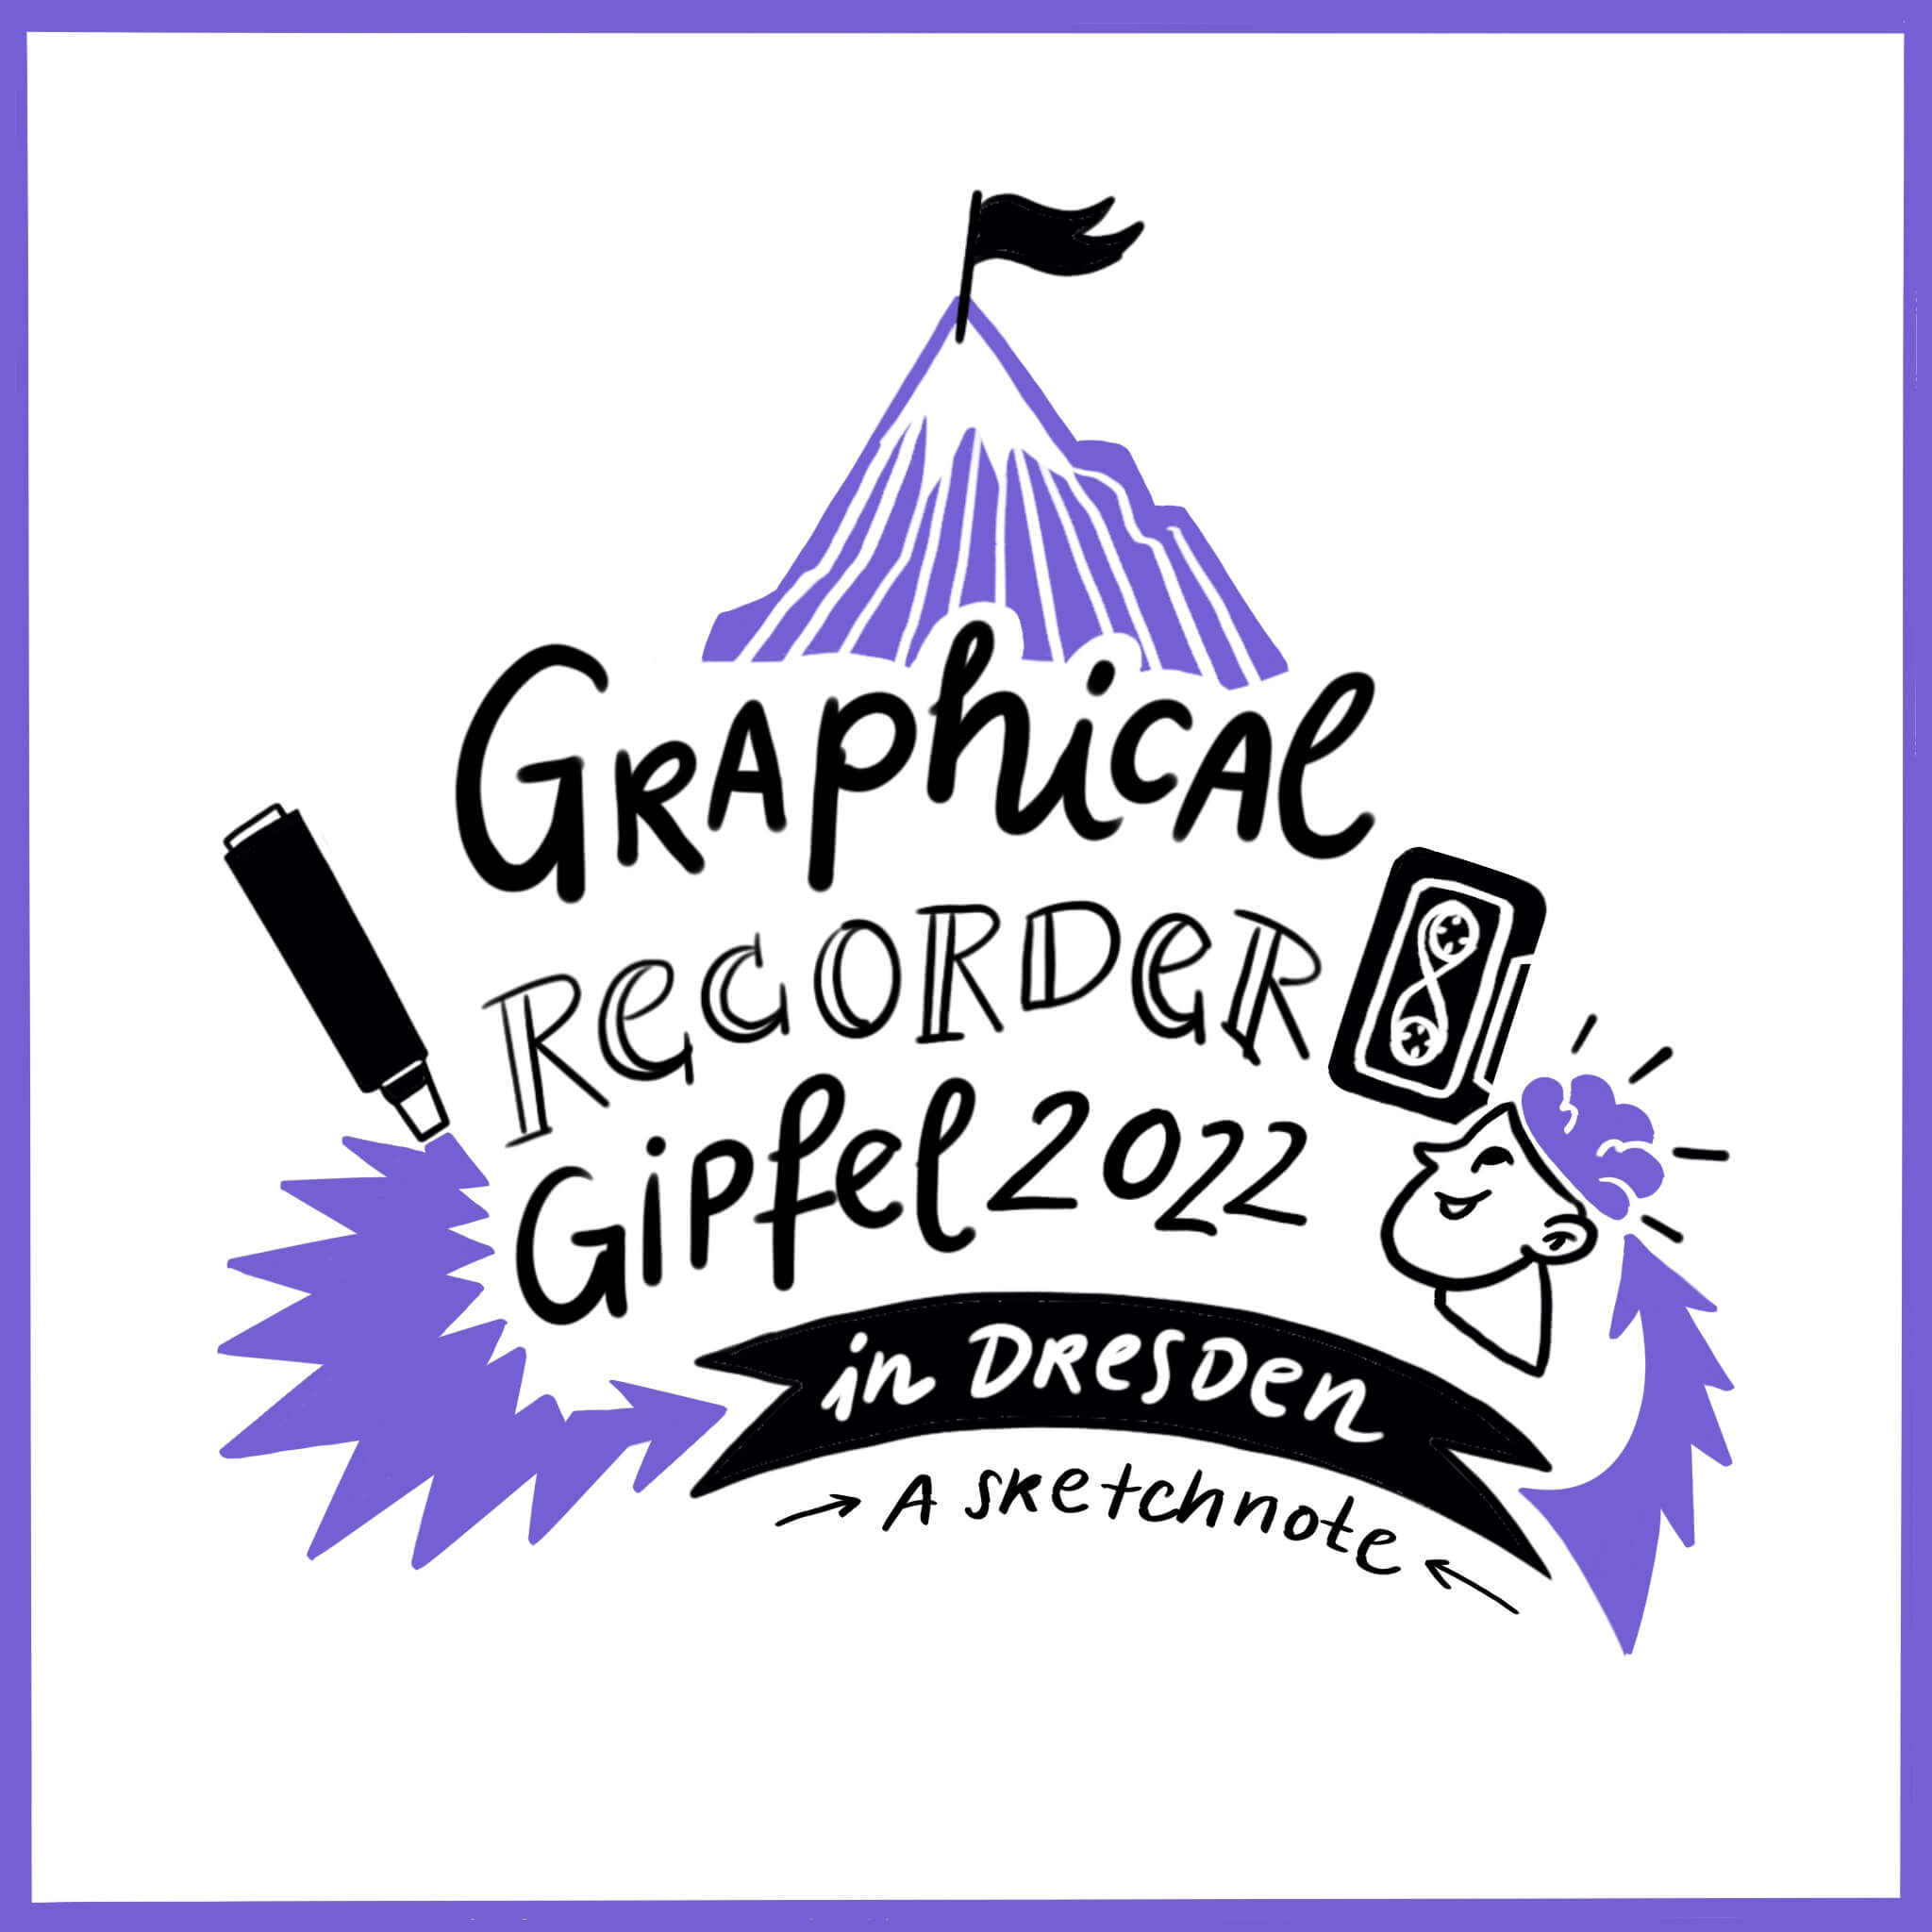 intro image about the graphical recorder gipfel in Dresden 2022